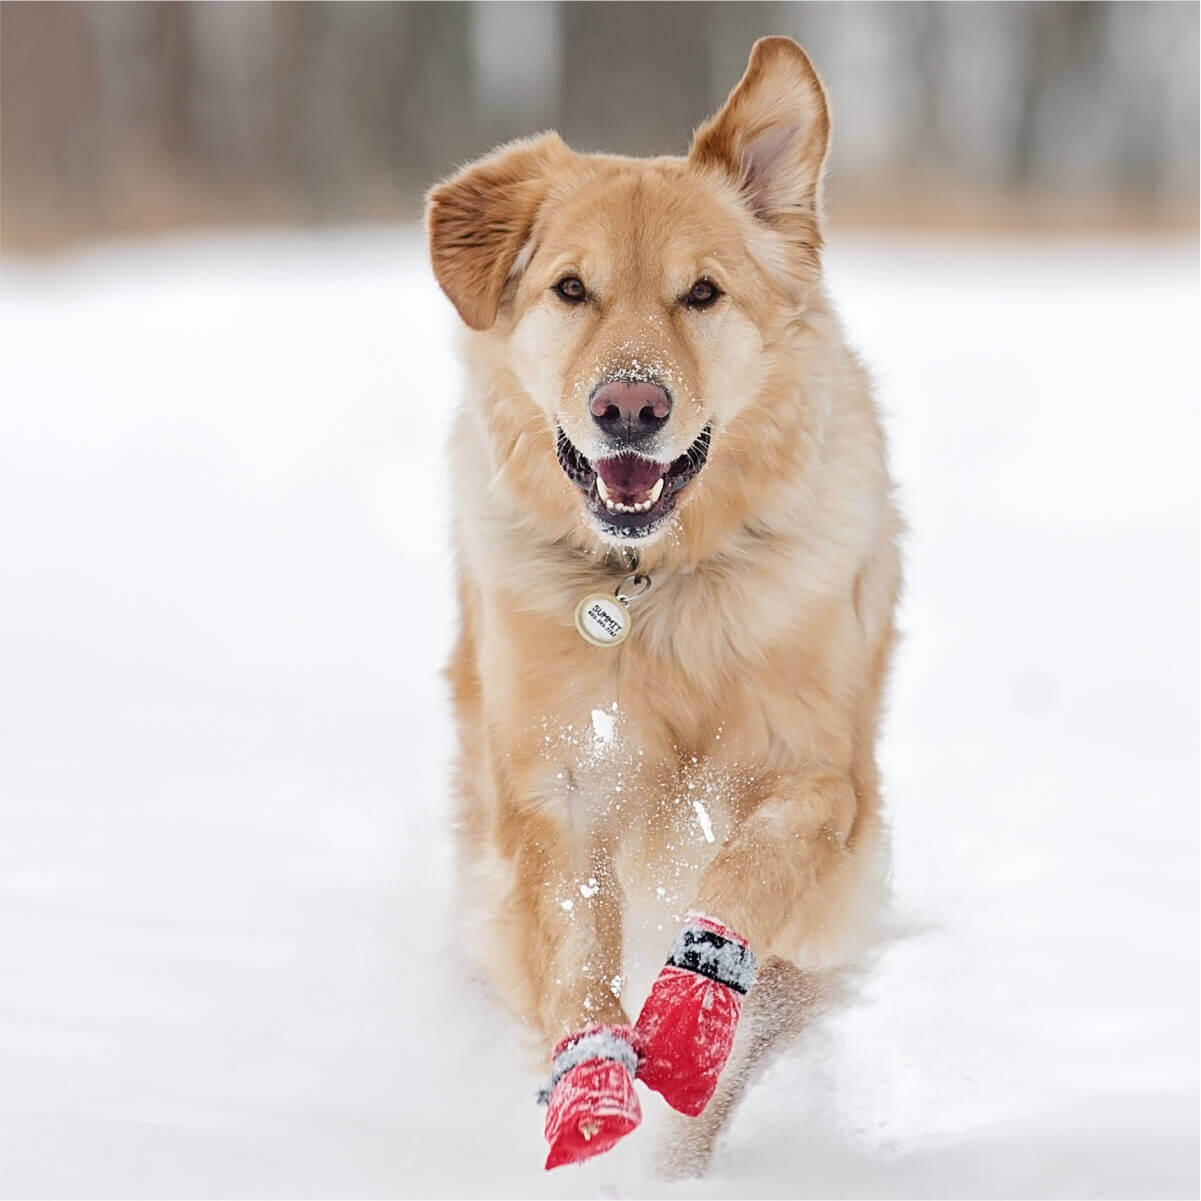 Cold Safety - With boundless energy, a golden retriever races through the snowy terrain, its feet adorned in eye-catching red shoes for a touch of flair.